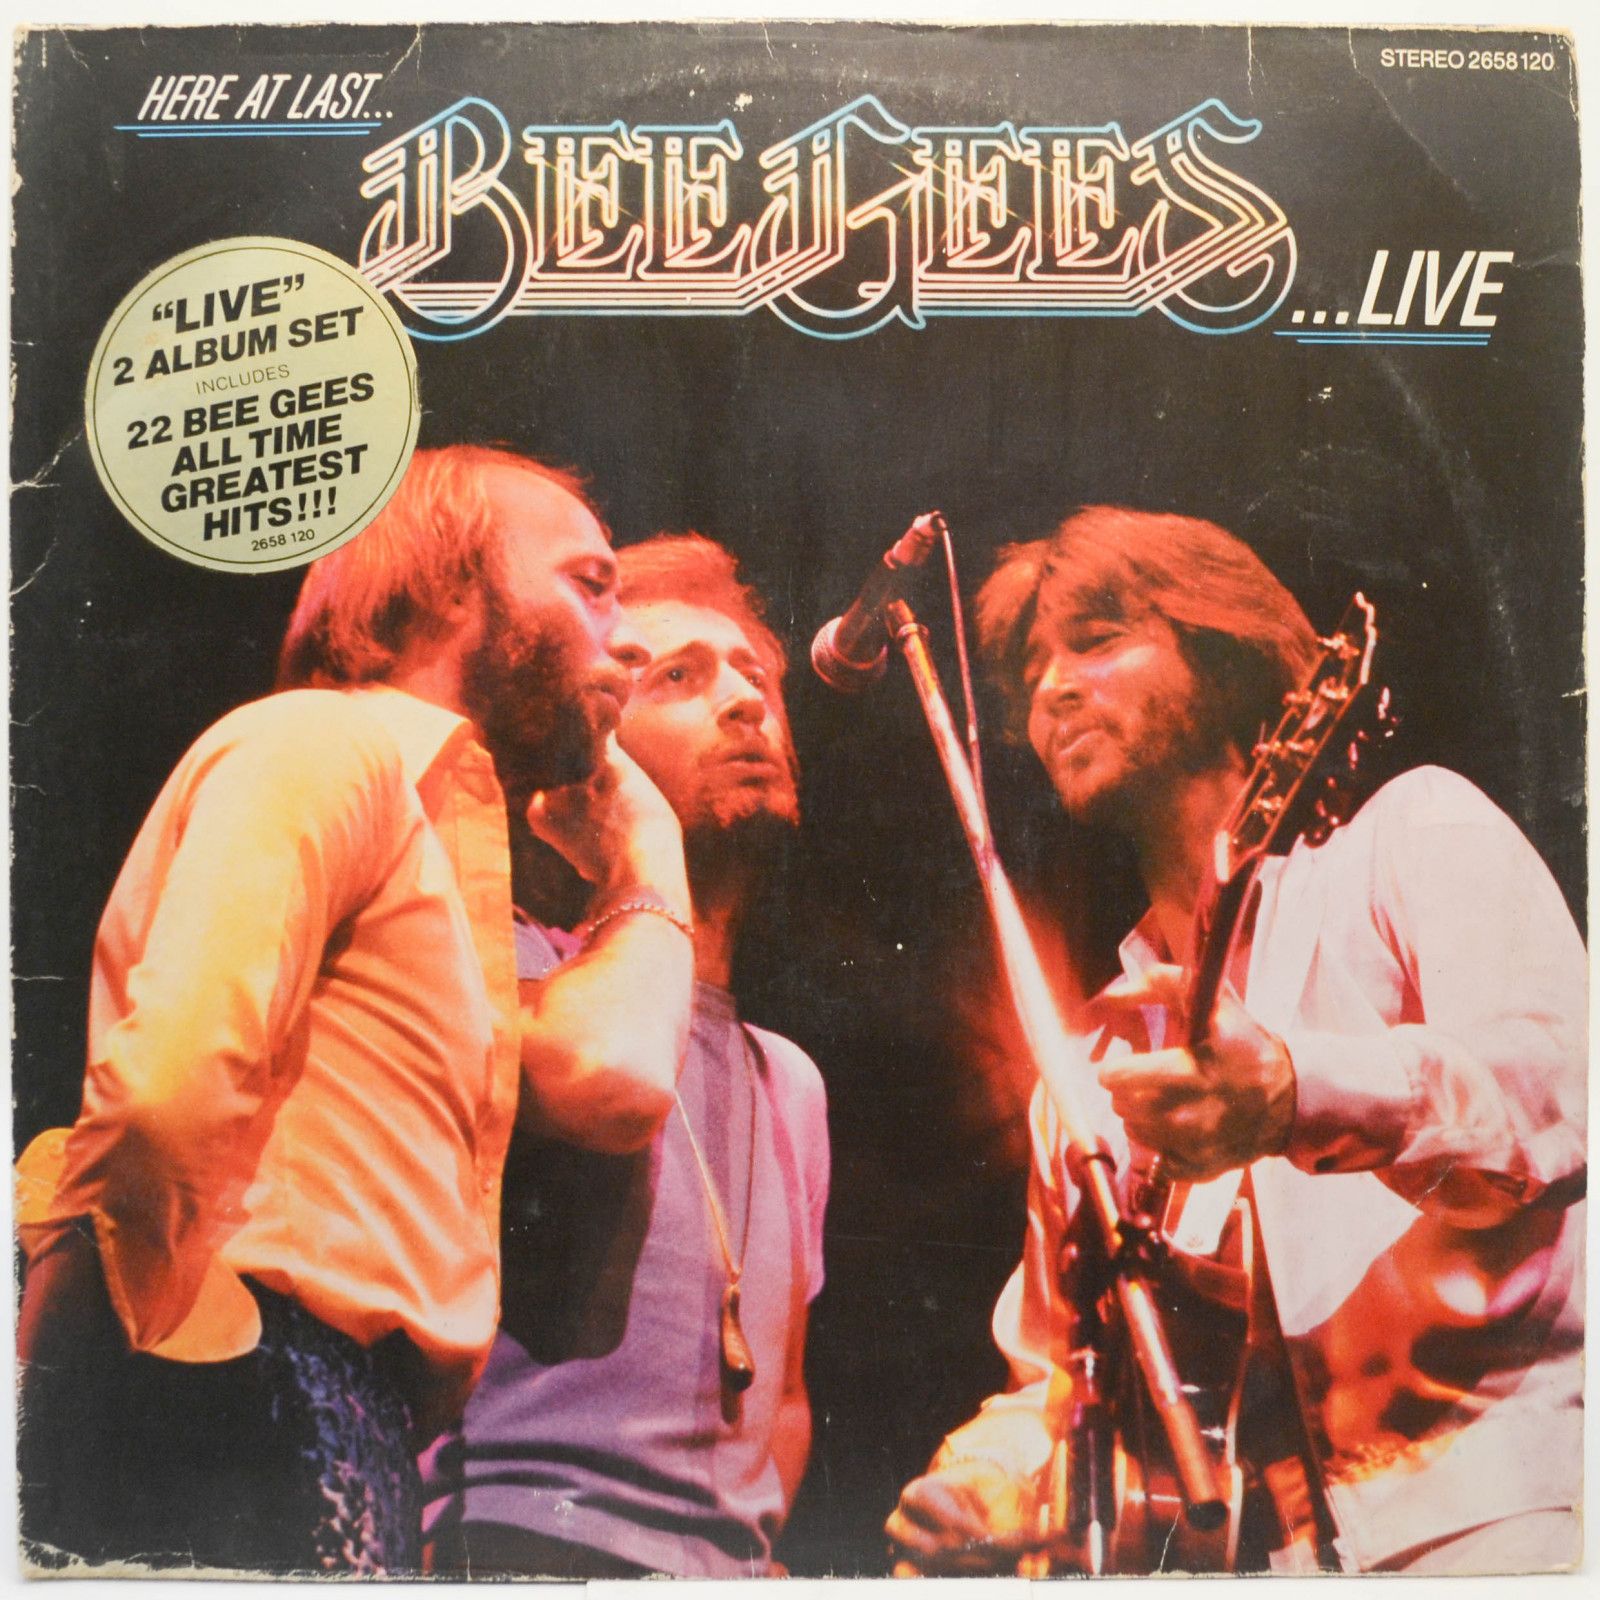 Bee Gees — Here At Last... Bee Gees ...Live (2LP), 1977